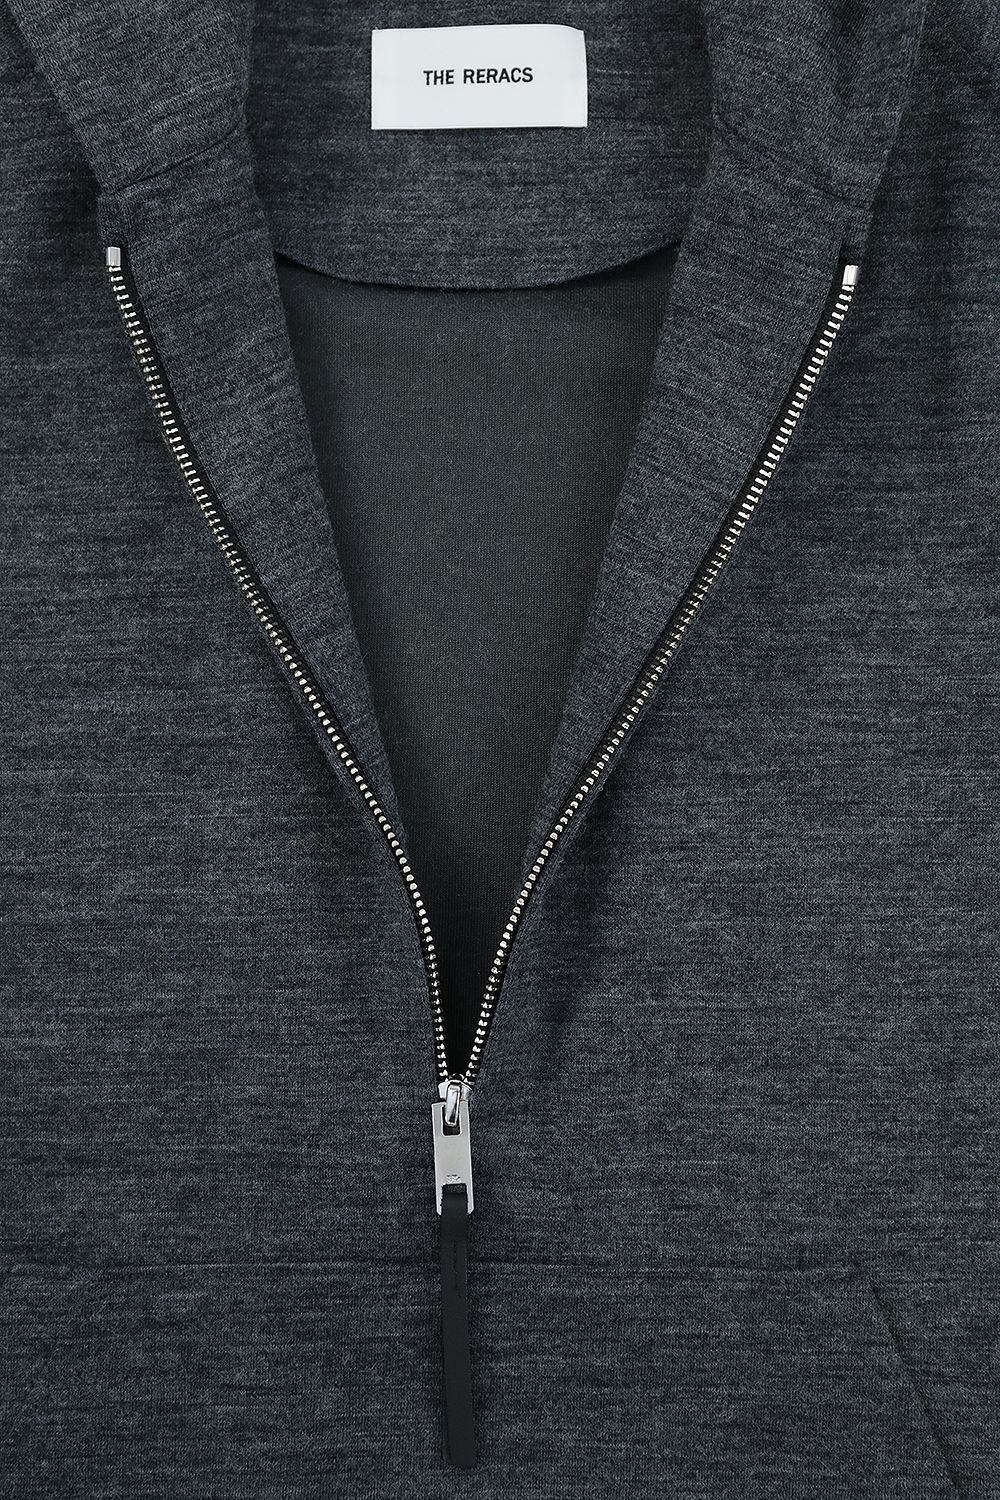 THE RERACS - 【23AW/ラスト1点】RERACS HALF ZIP HOODED PULLOVER(TOP 